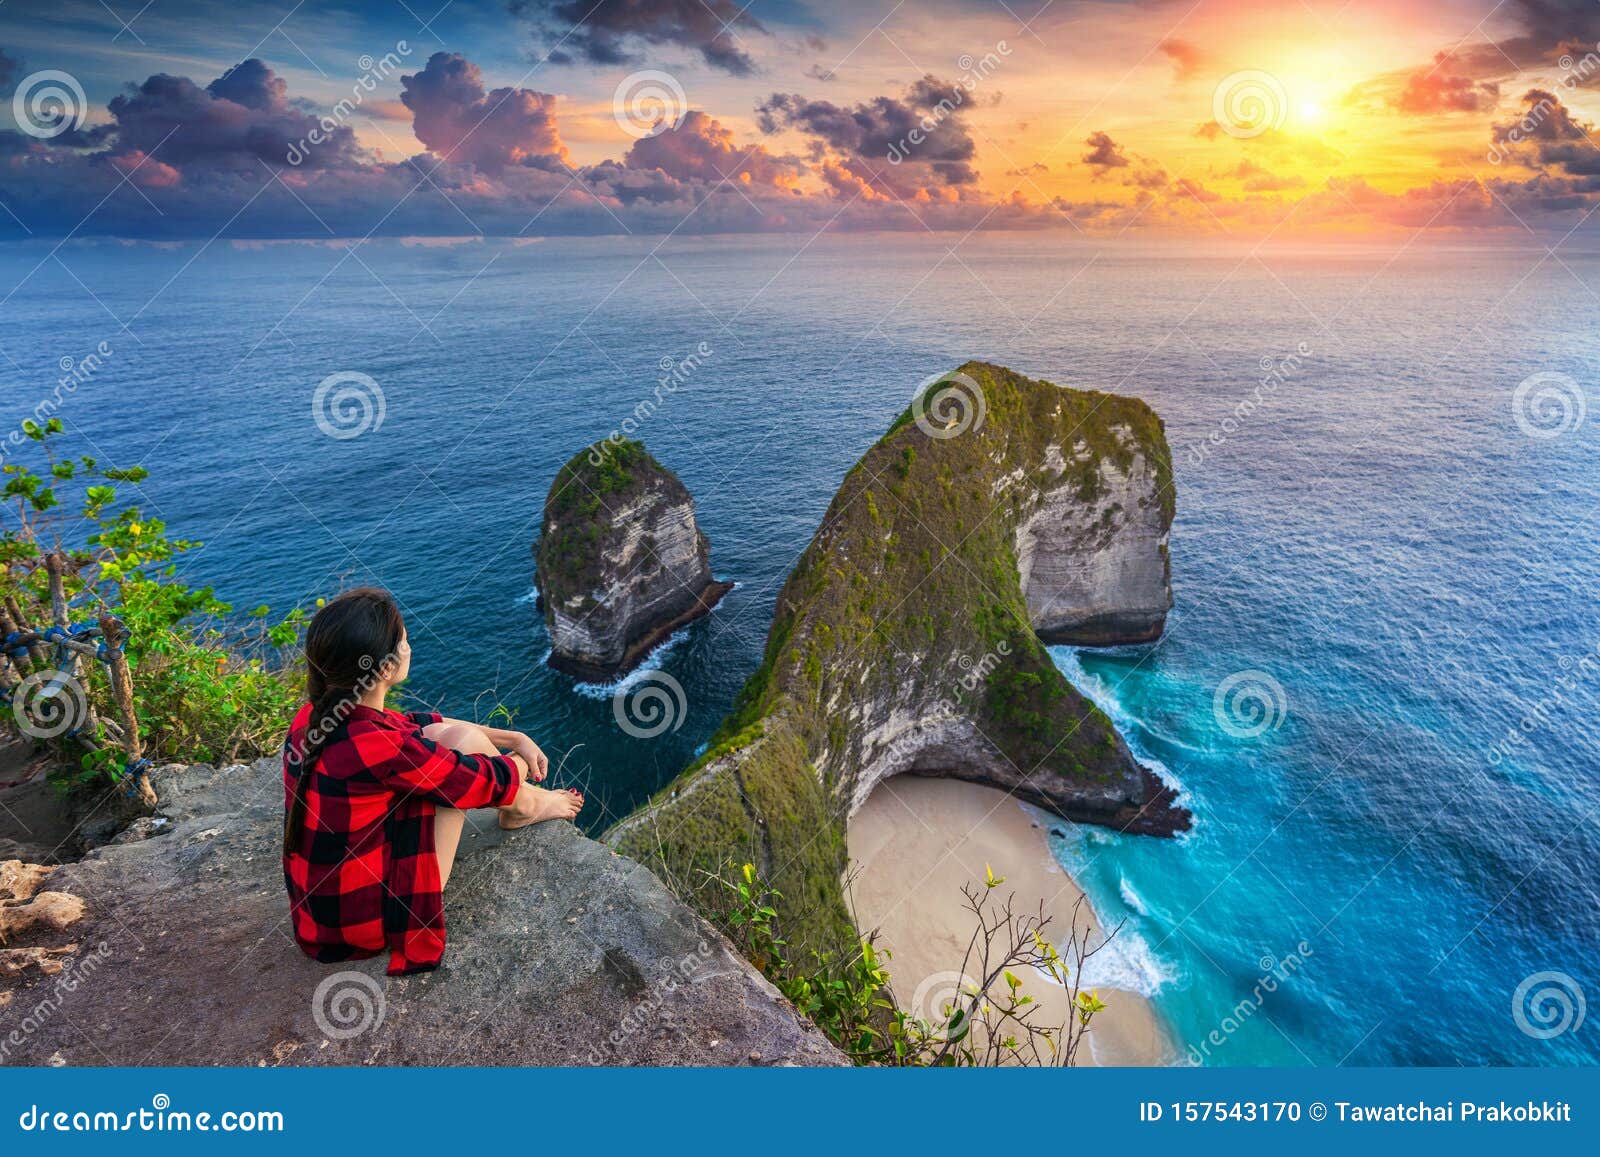 woman sitting on cliff and looking at sunset at kelingking beach in nusa penida island, bali, indonesia.